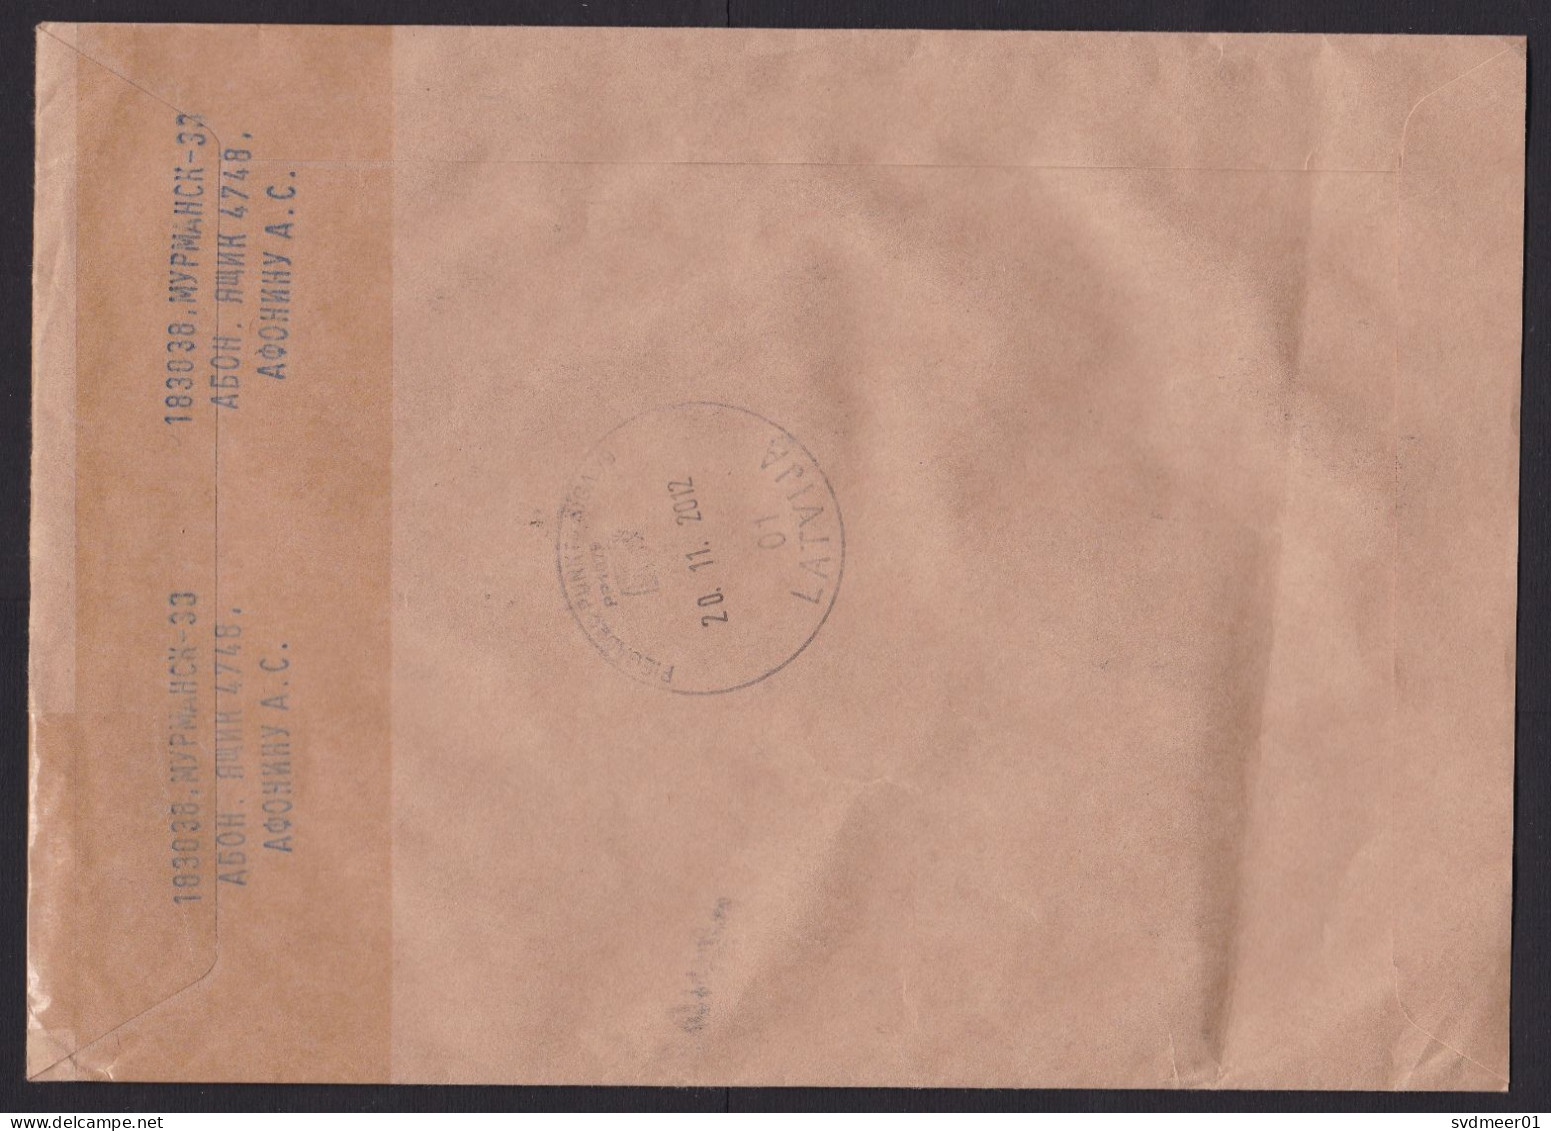 Russia: Registered Cover To Latvia, 2012, 4 Stamps, Cancel Atomic Ship, CN22 Customs Declaration Label (minor Creases) - Covers & Documents